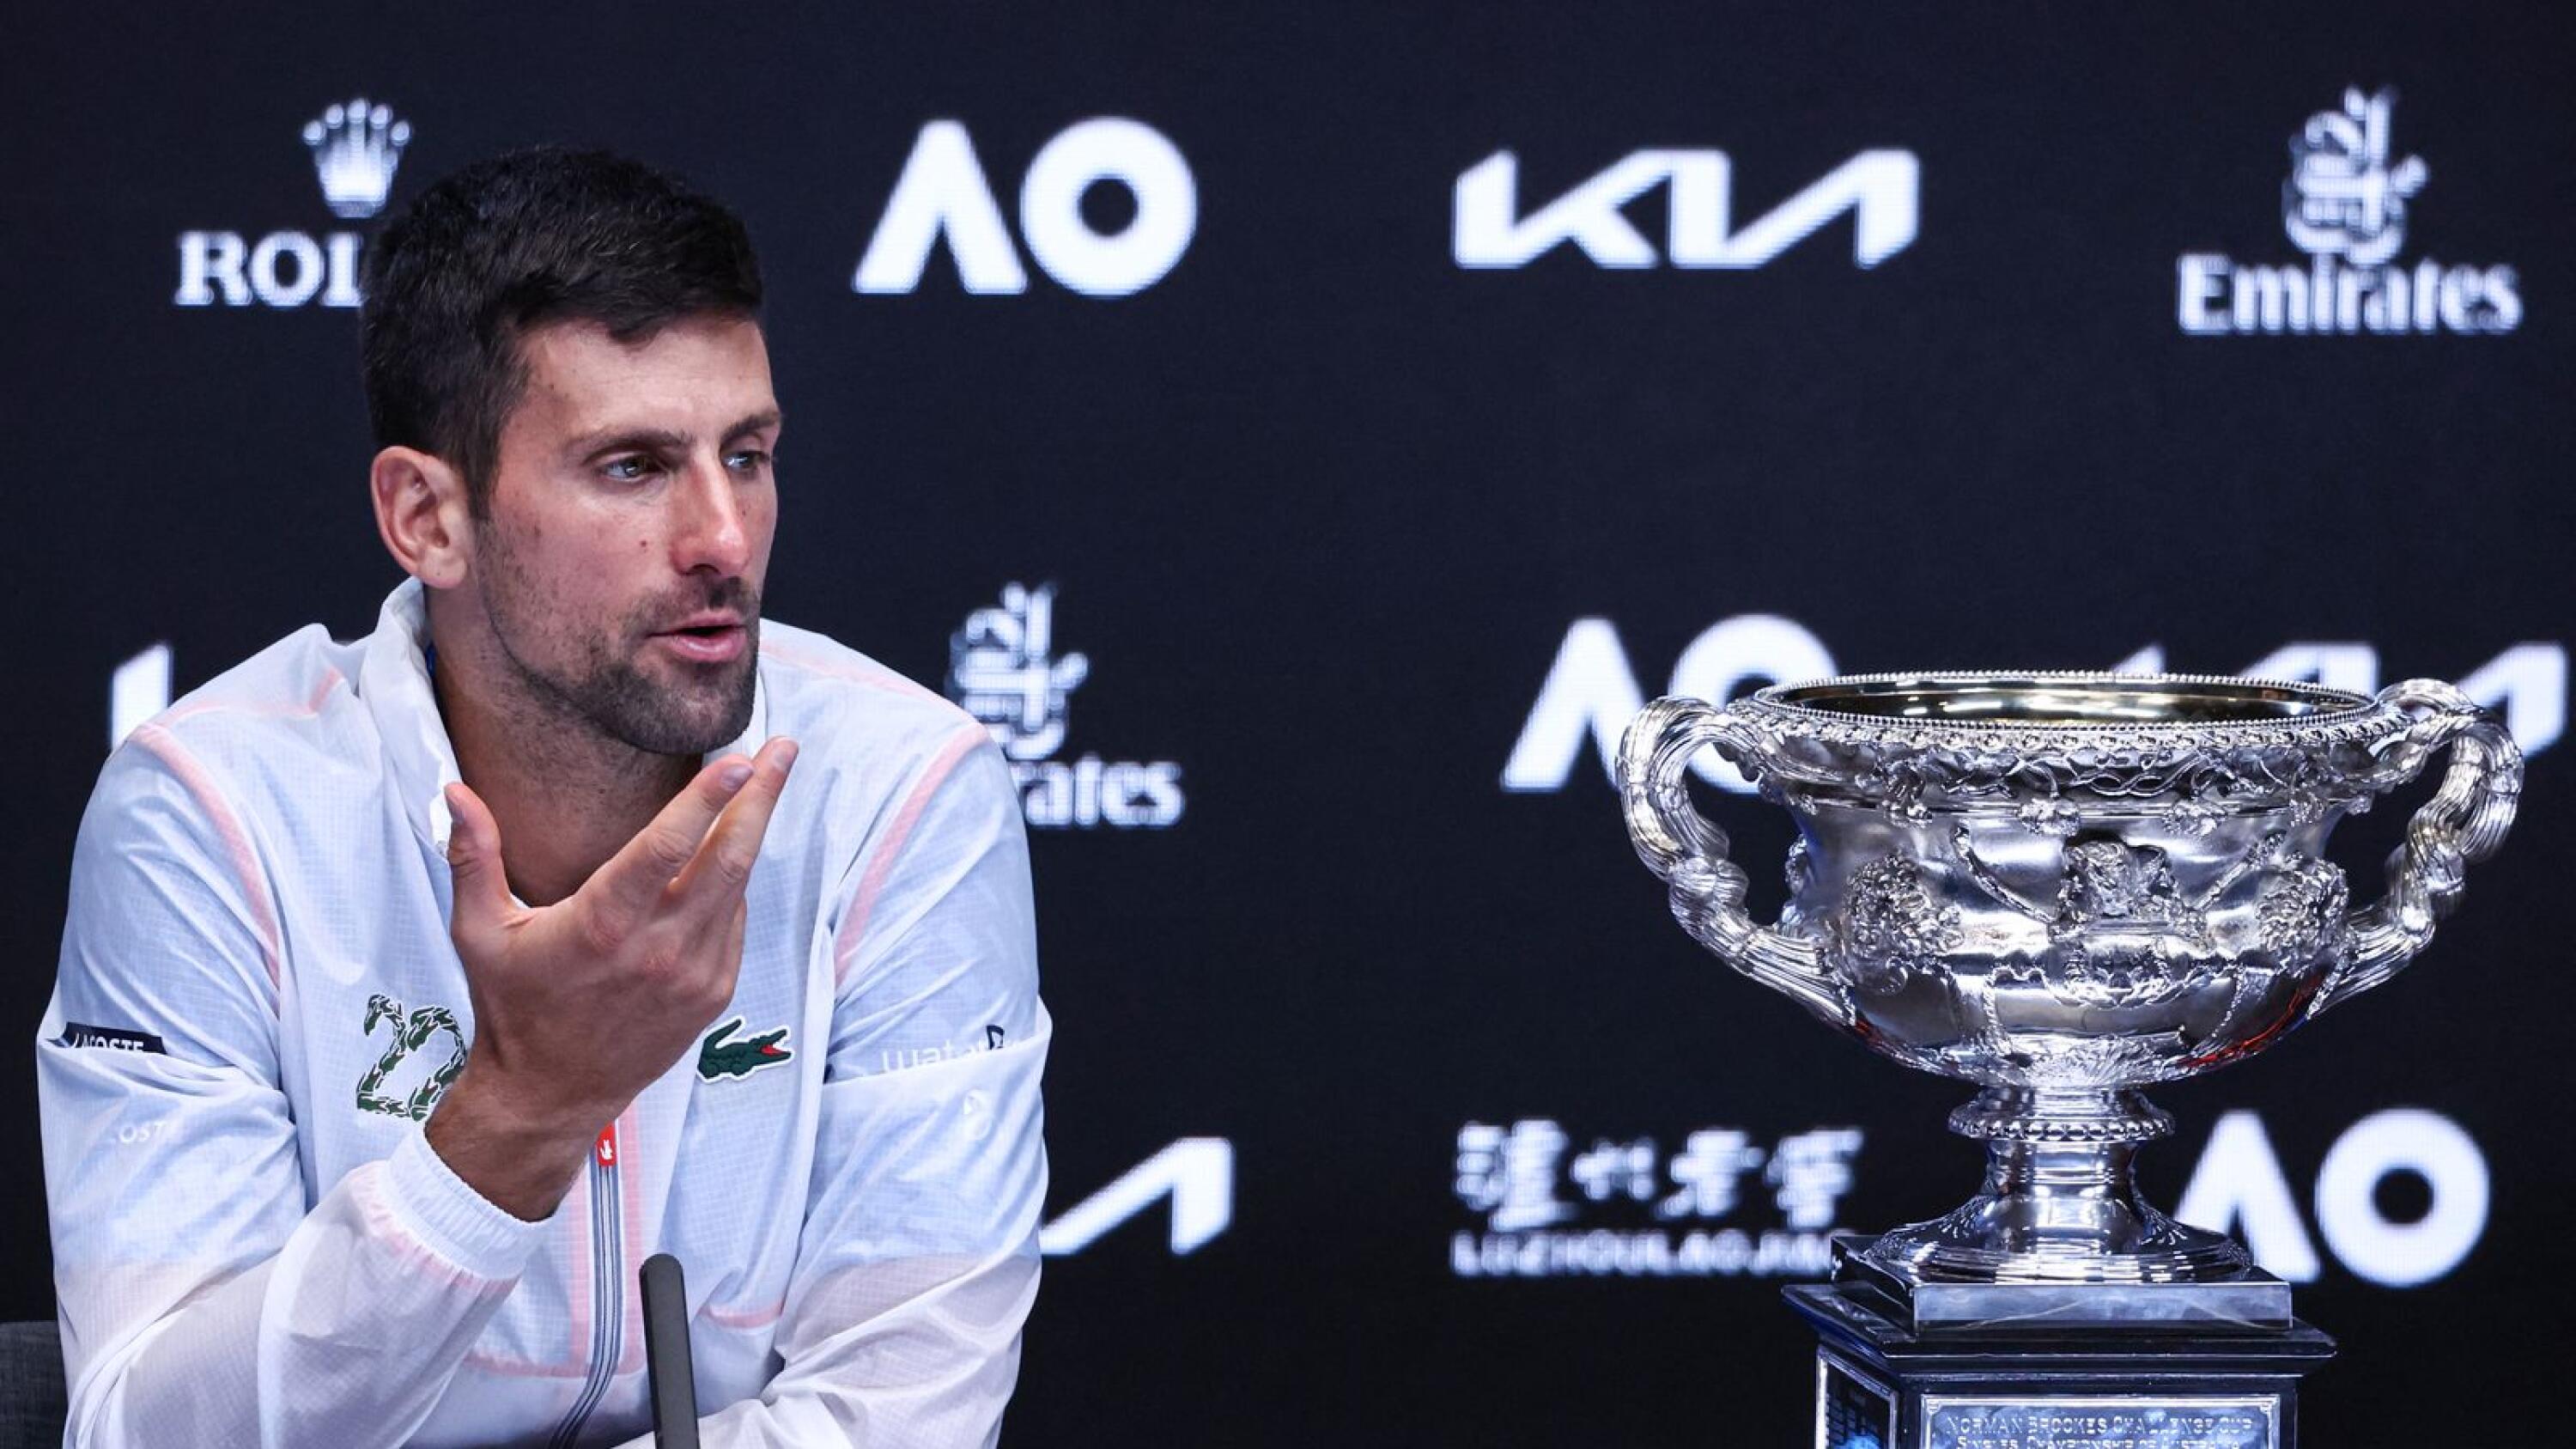 Serbia's Novak Djokovic gives a press conference after winning the men's singles final match against Greece's Stefanos Tsitsipas on day fourteen of the Australian Open tennis tournament in Melbourne on Sunday